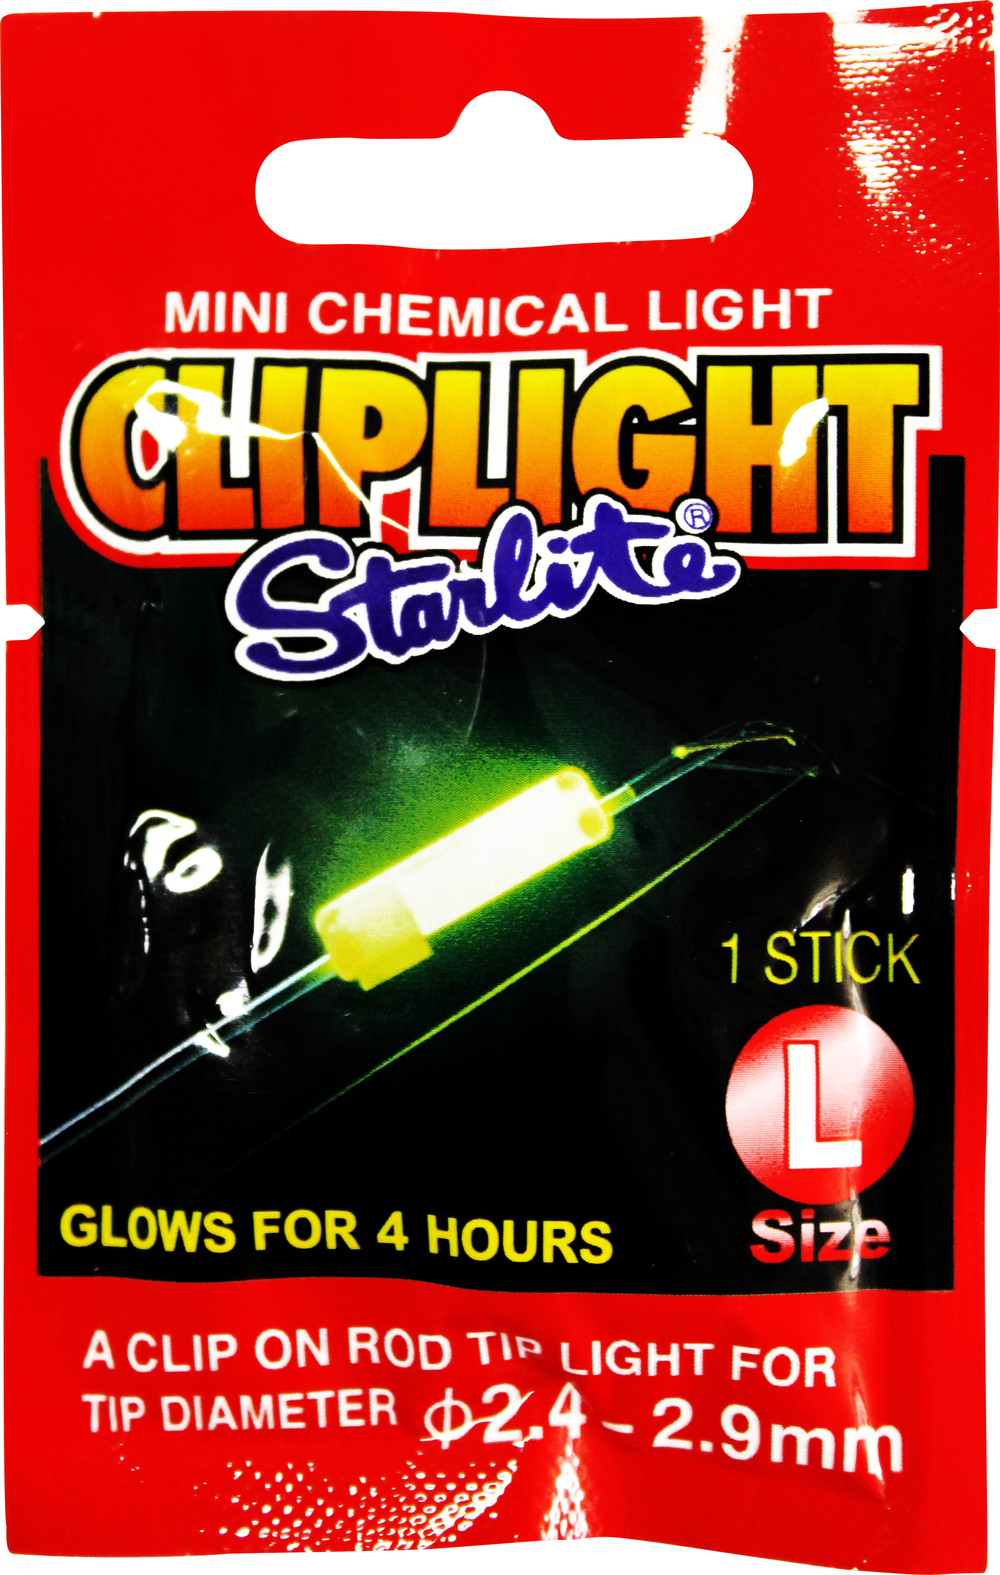 Large Size Starlite Chemical Cliplight-Clip on Fishing Rod Tip